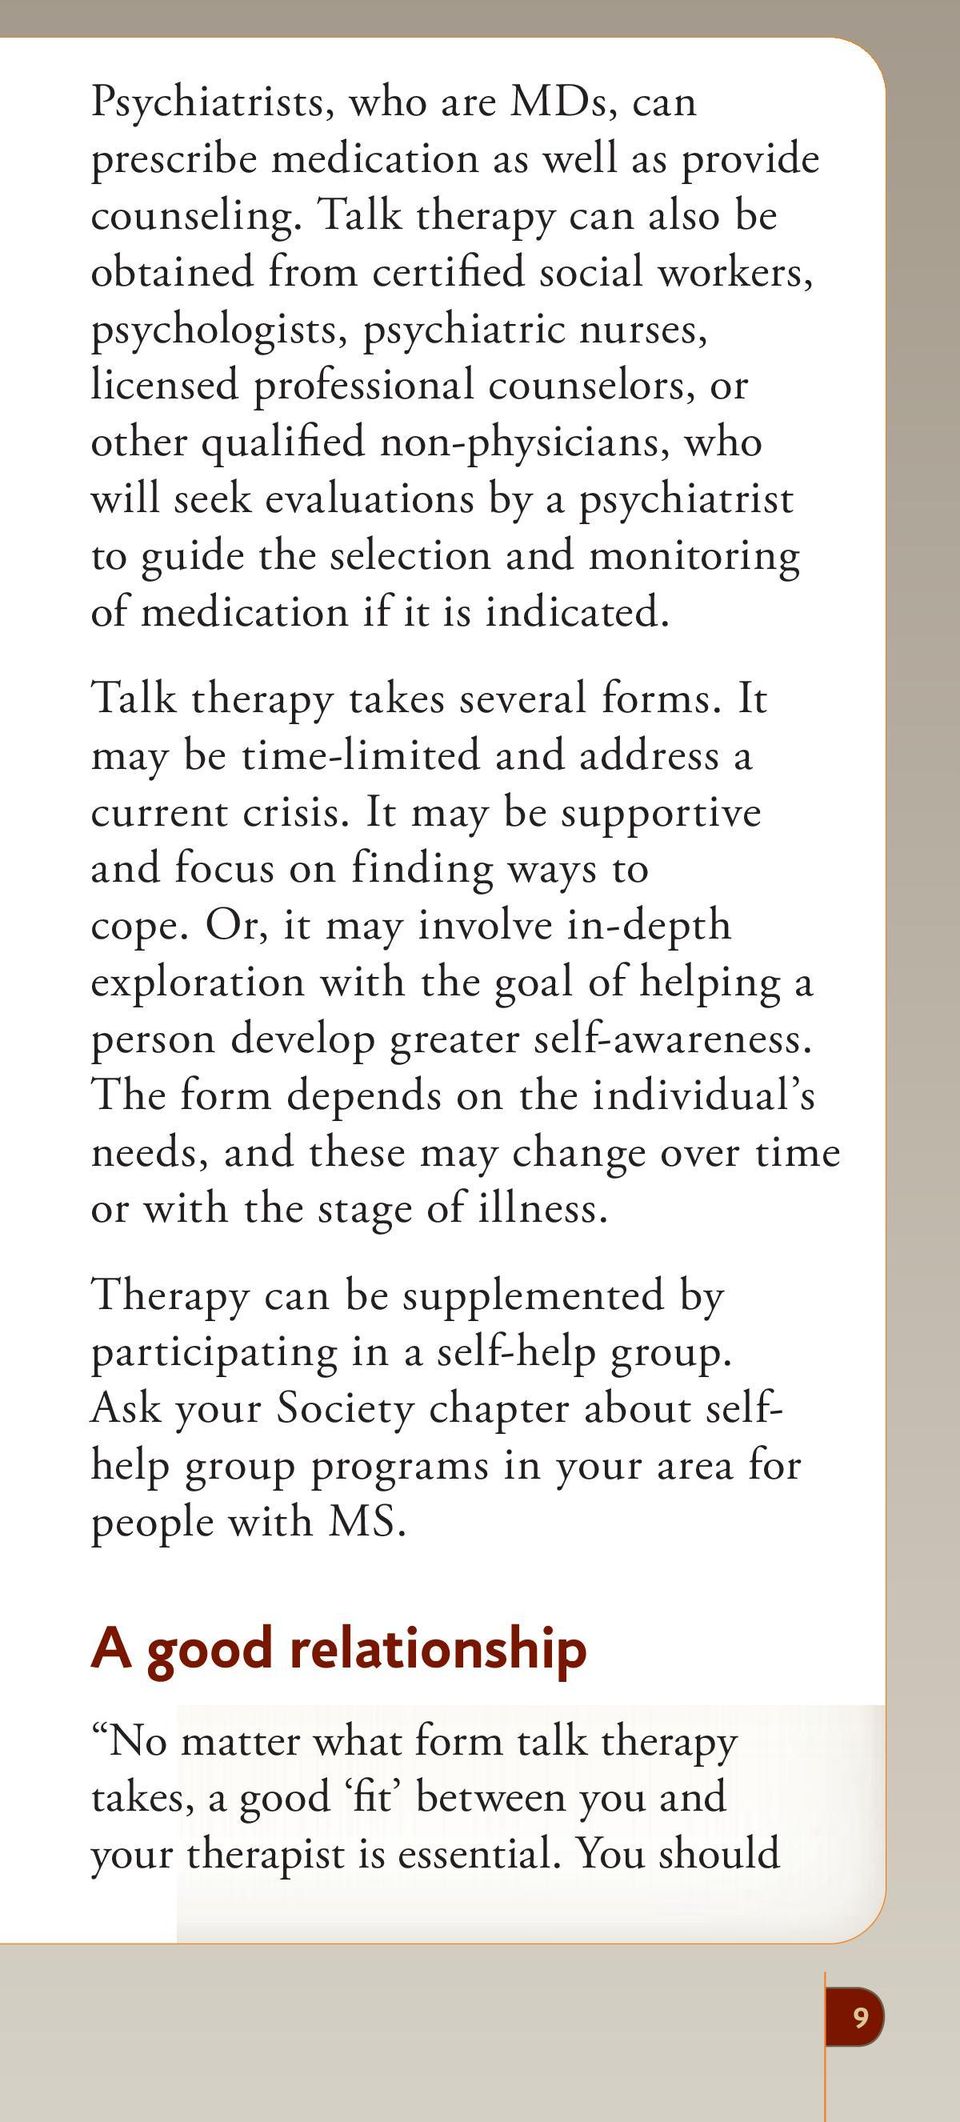 psychiatrist to guide the selection and monitoring of medication if it is indicated. Talk therapy takes several forms. It may be time-limited and address a current crisis.